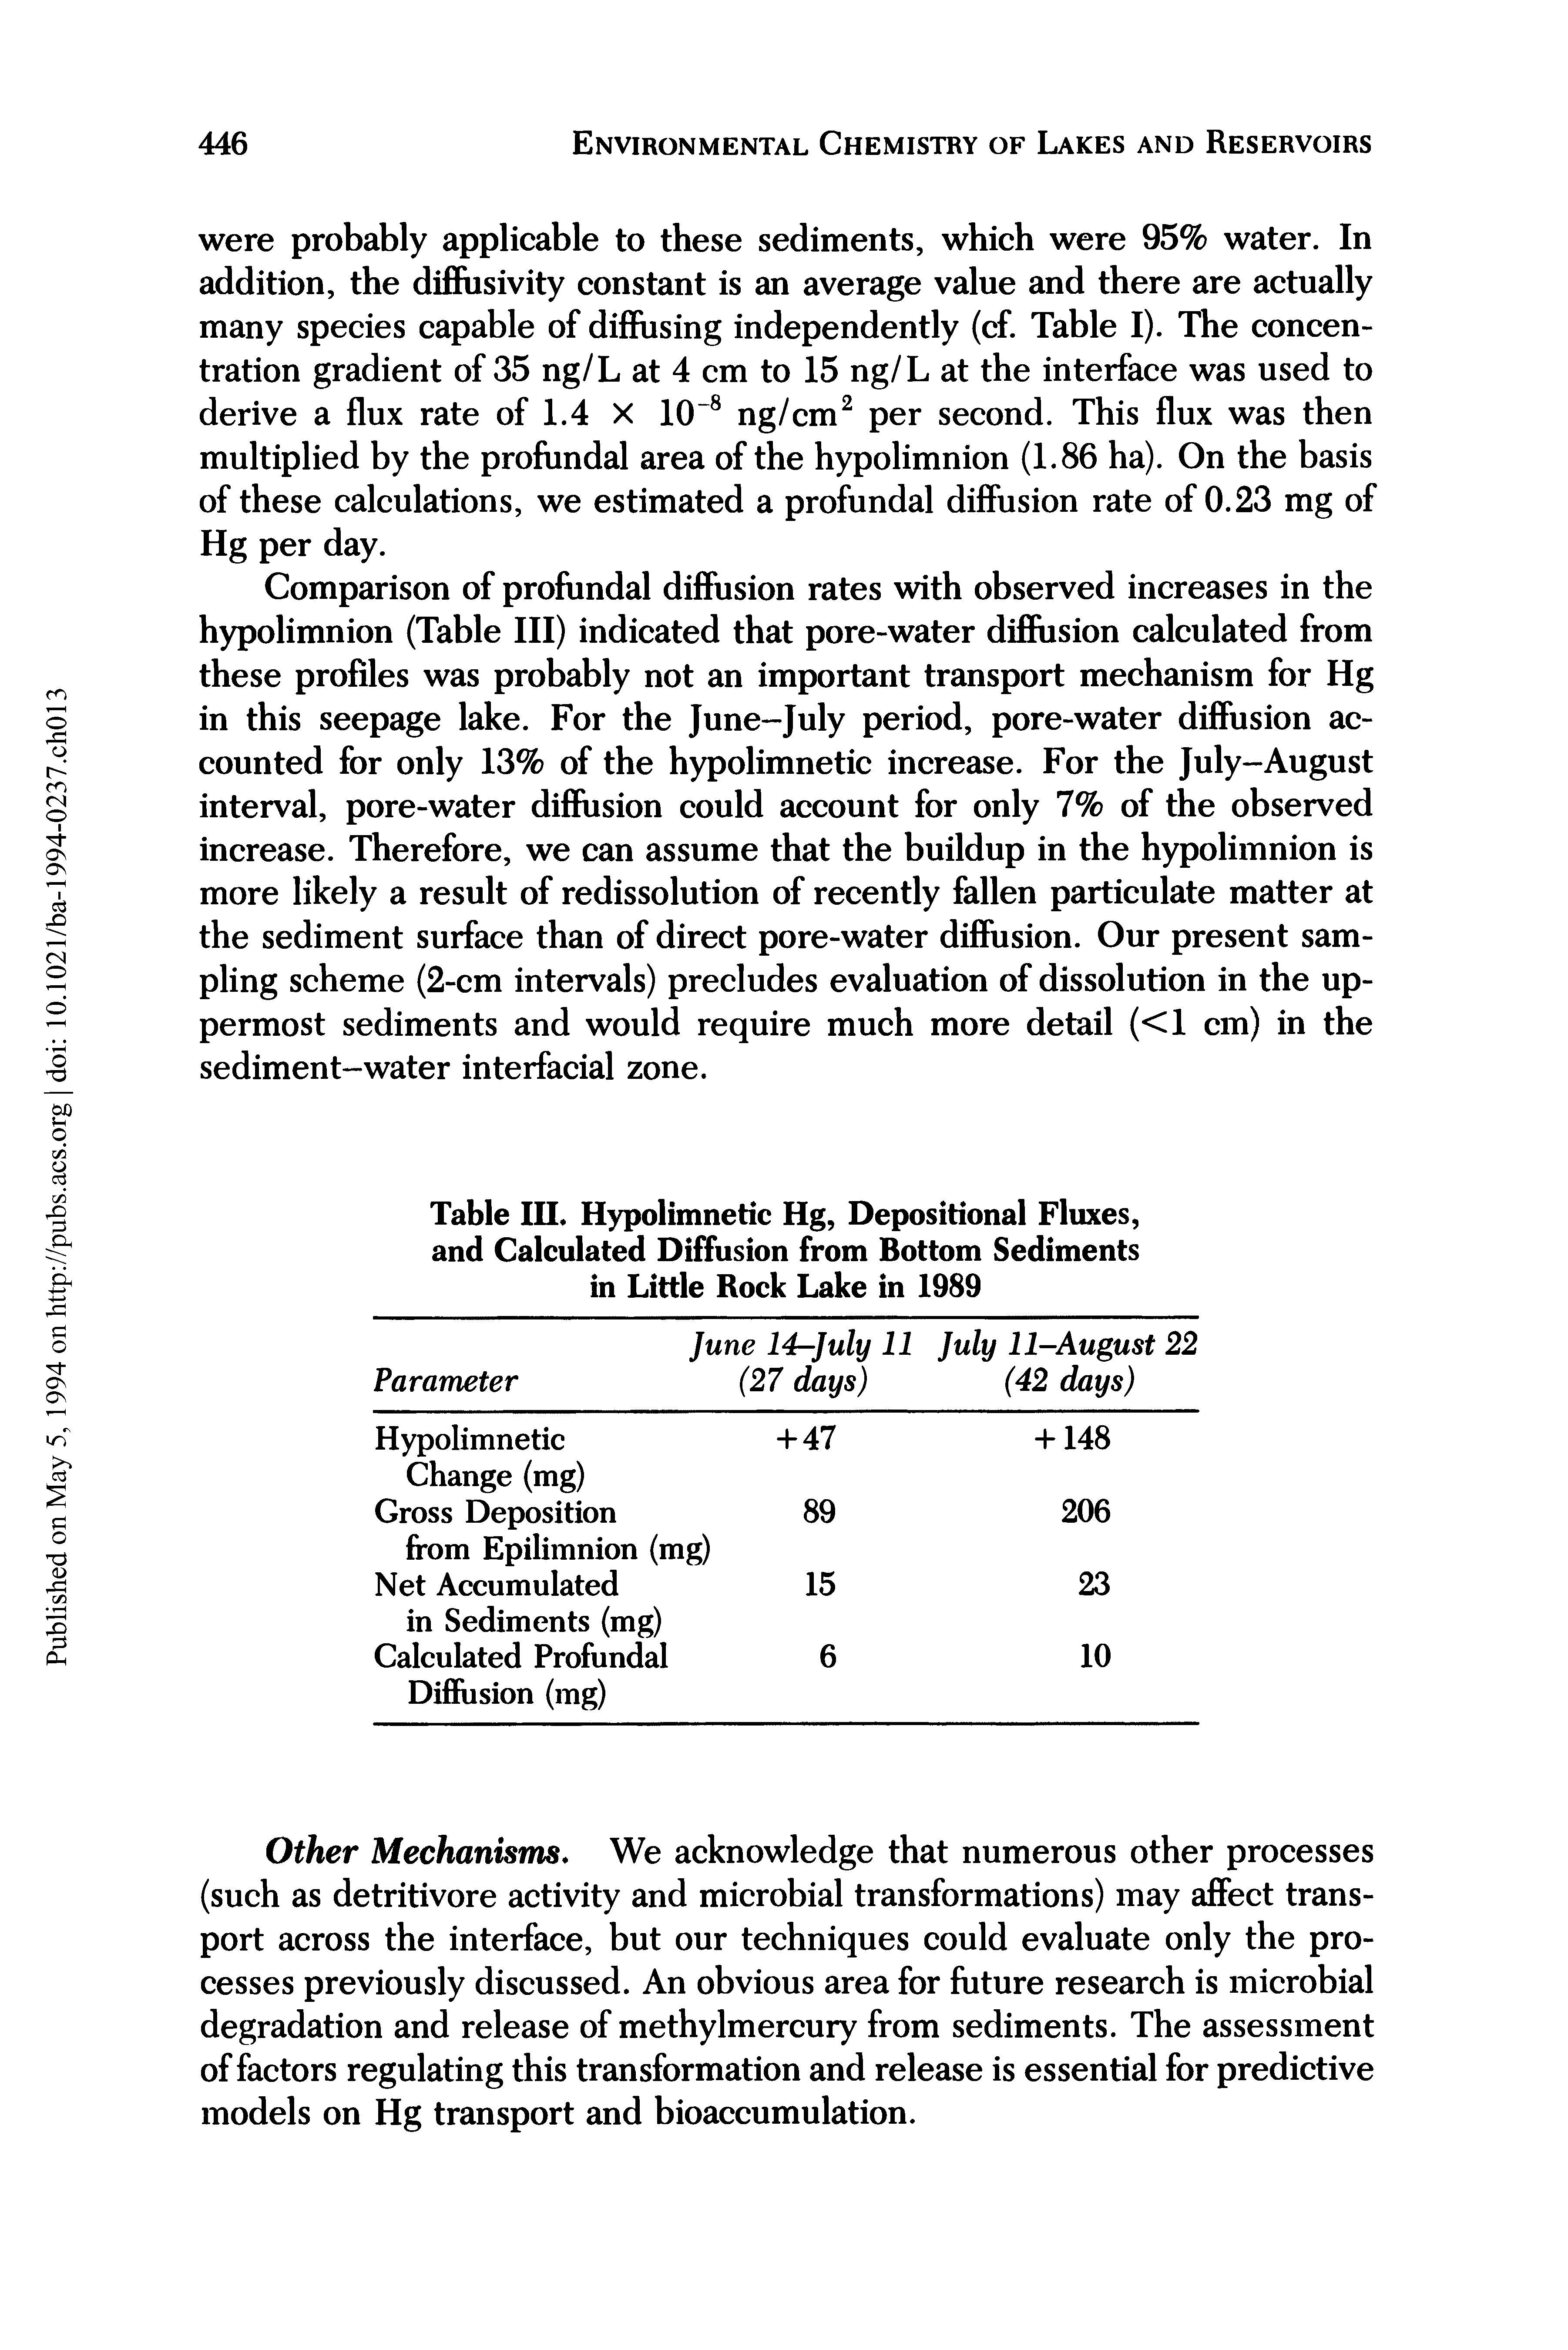 Table III. Hypolimnetic Hg, Depositional Fluxes, and Calculated Diffusion from Bottom Sediments in Little Rock Lake in 1989...